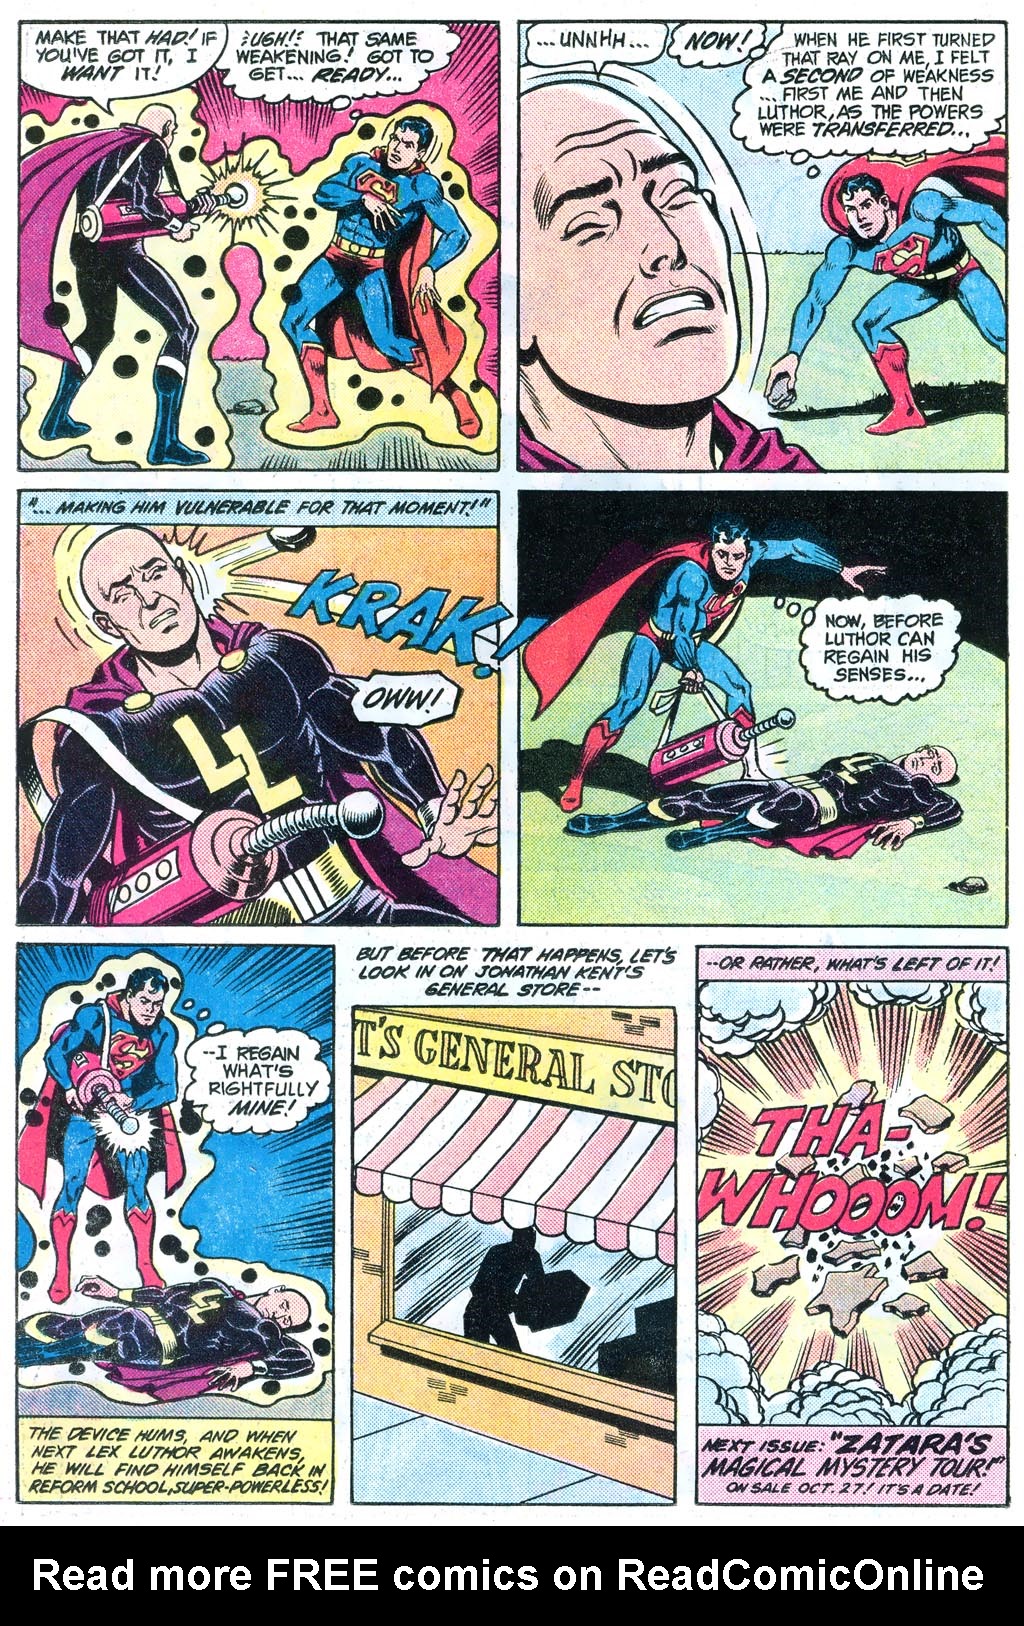 The New Adventures of Superboy 48 Page 20